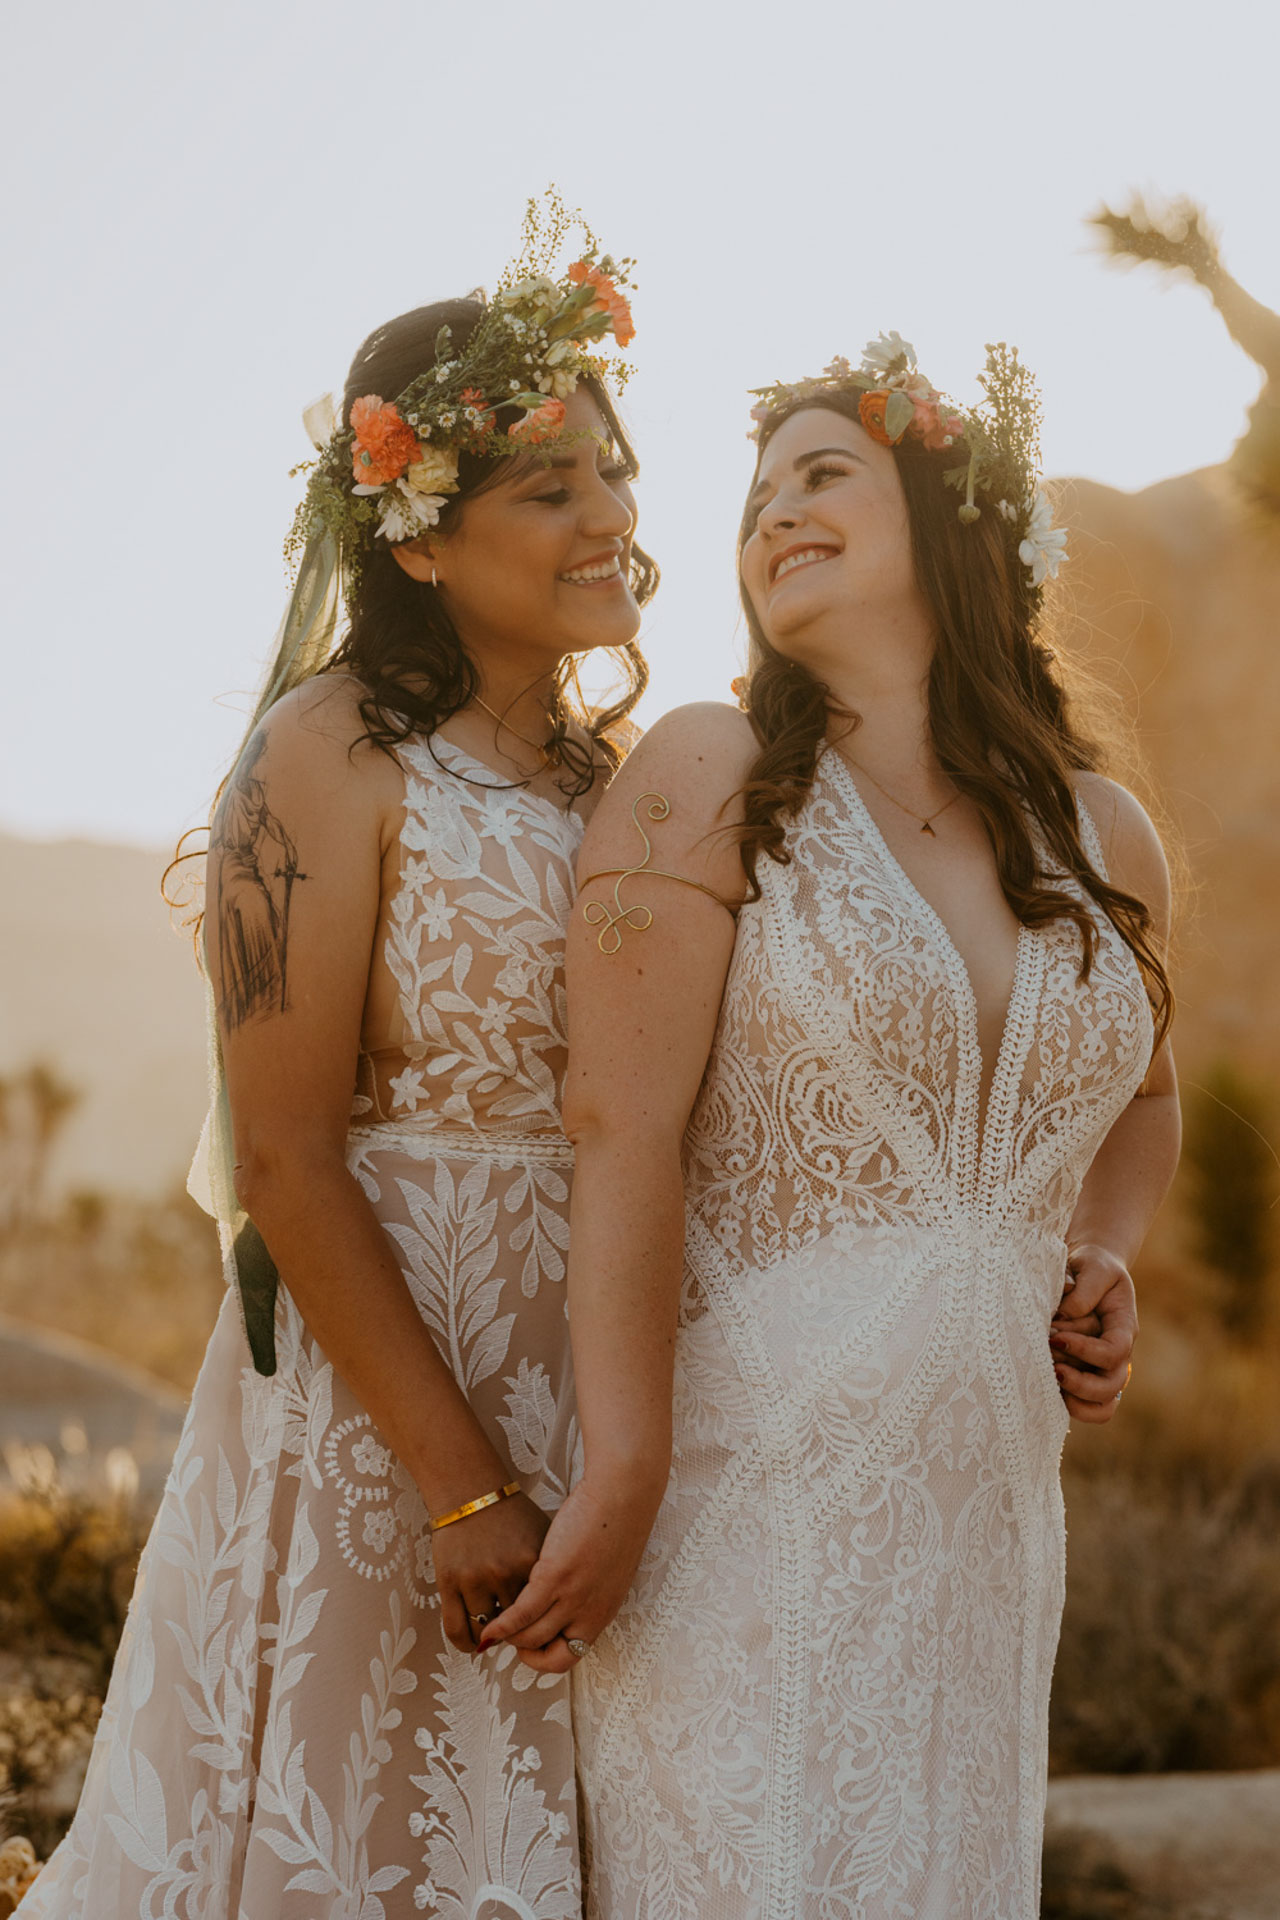 The brides looking at one another and smiling — Joshua Tree Wedding Photographer